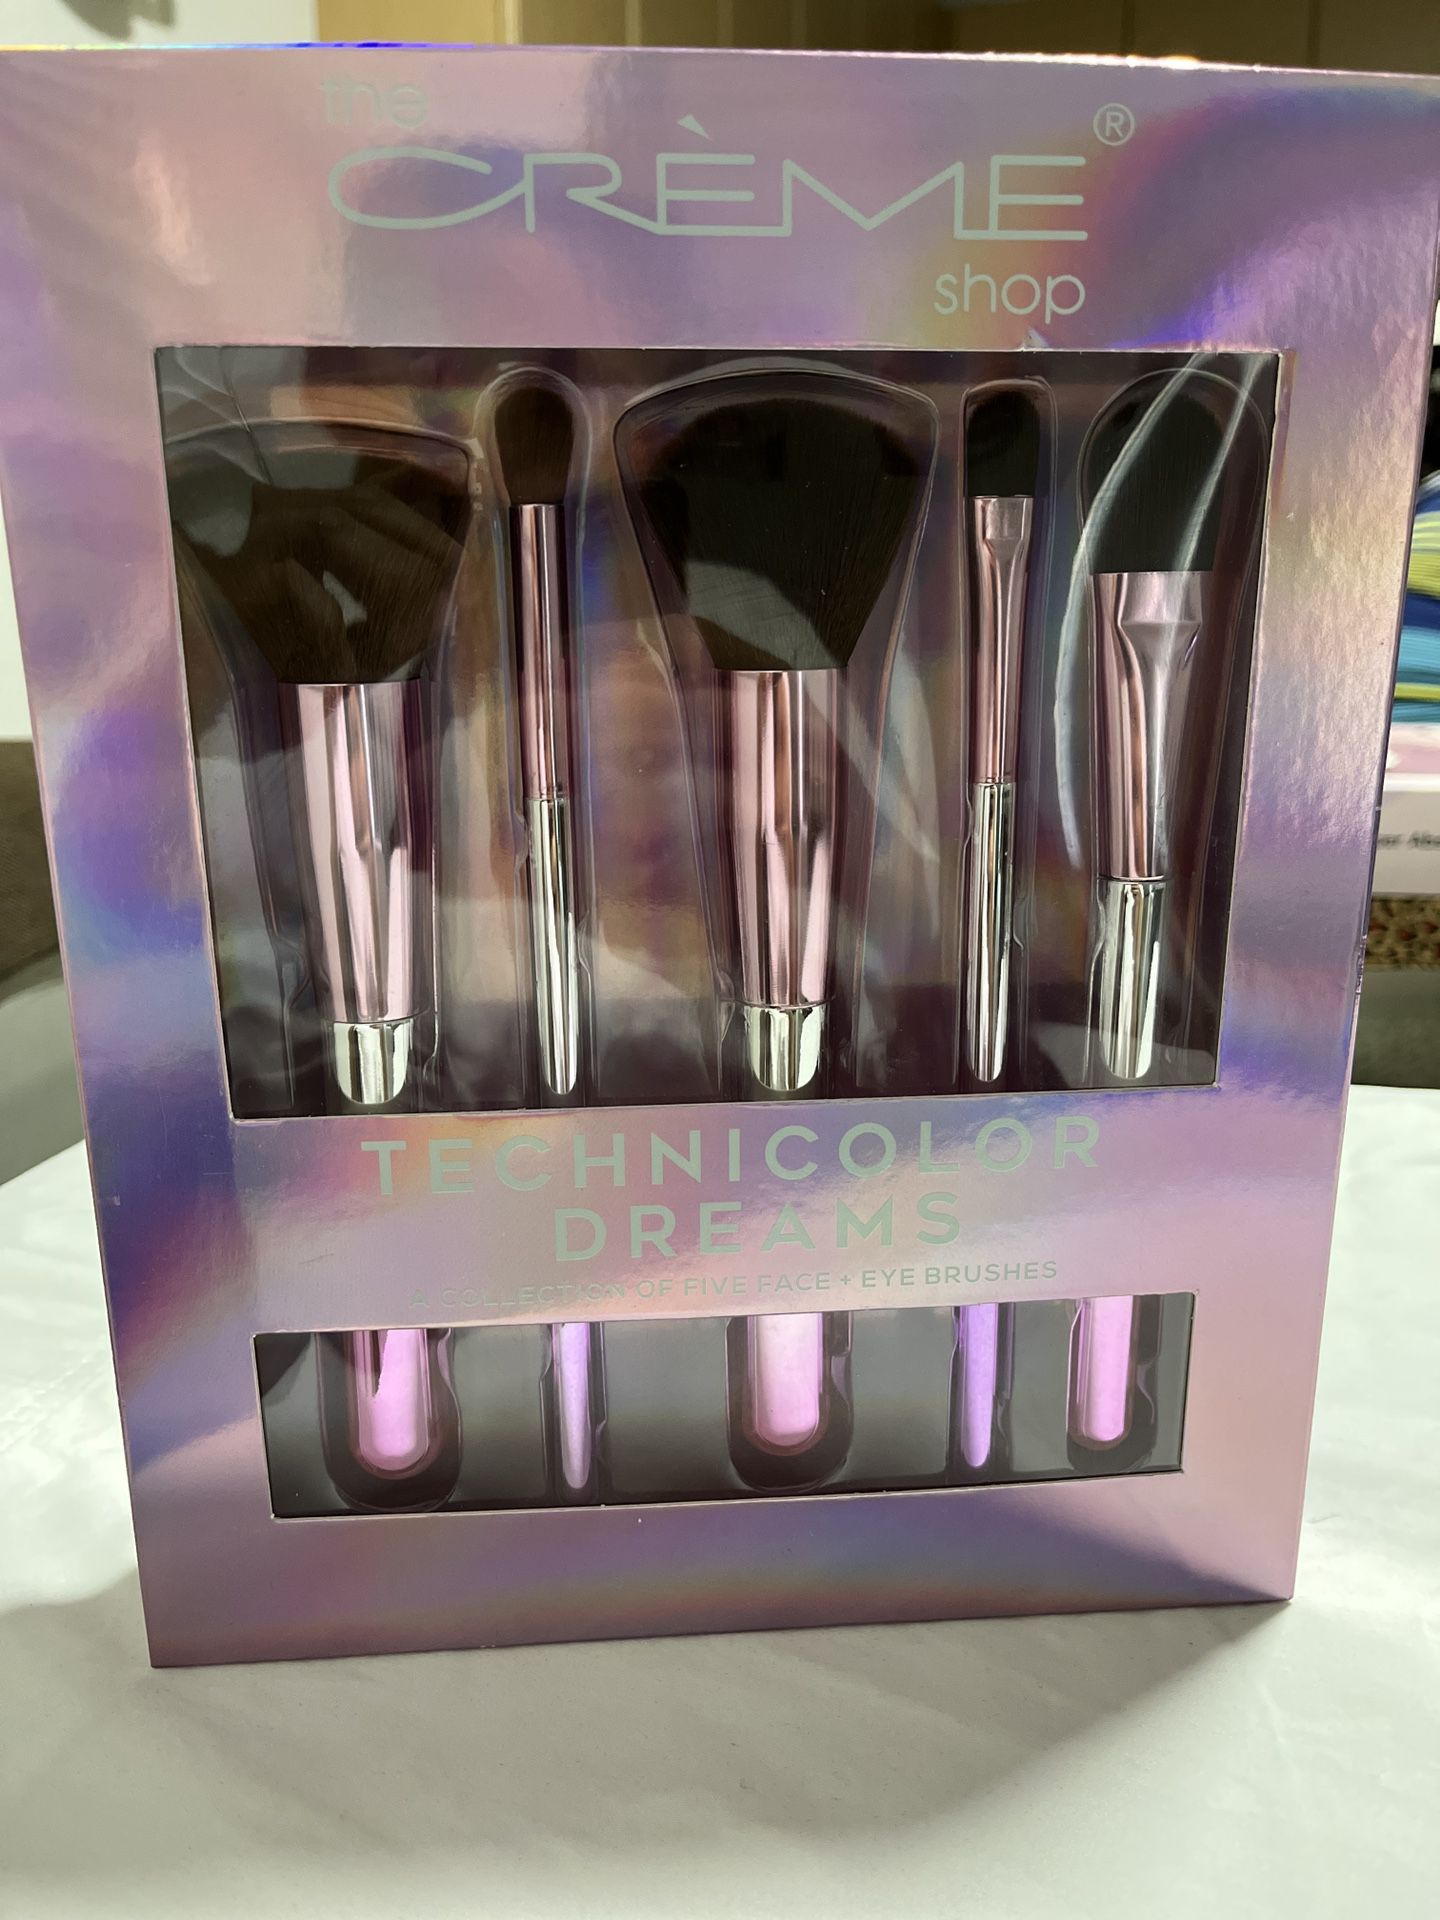 The CREME Shop Technicolor Dreams. A Collection of Five Face + Eye Brushes